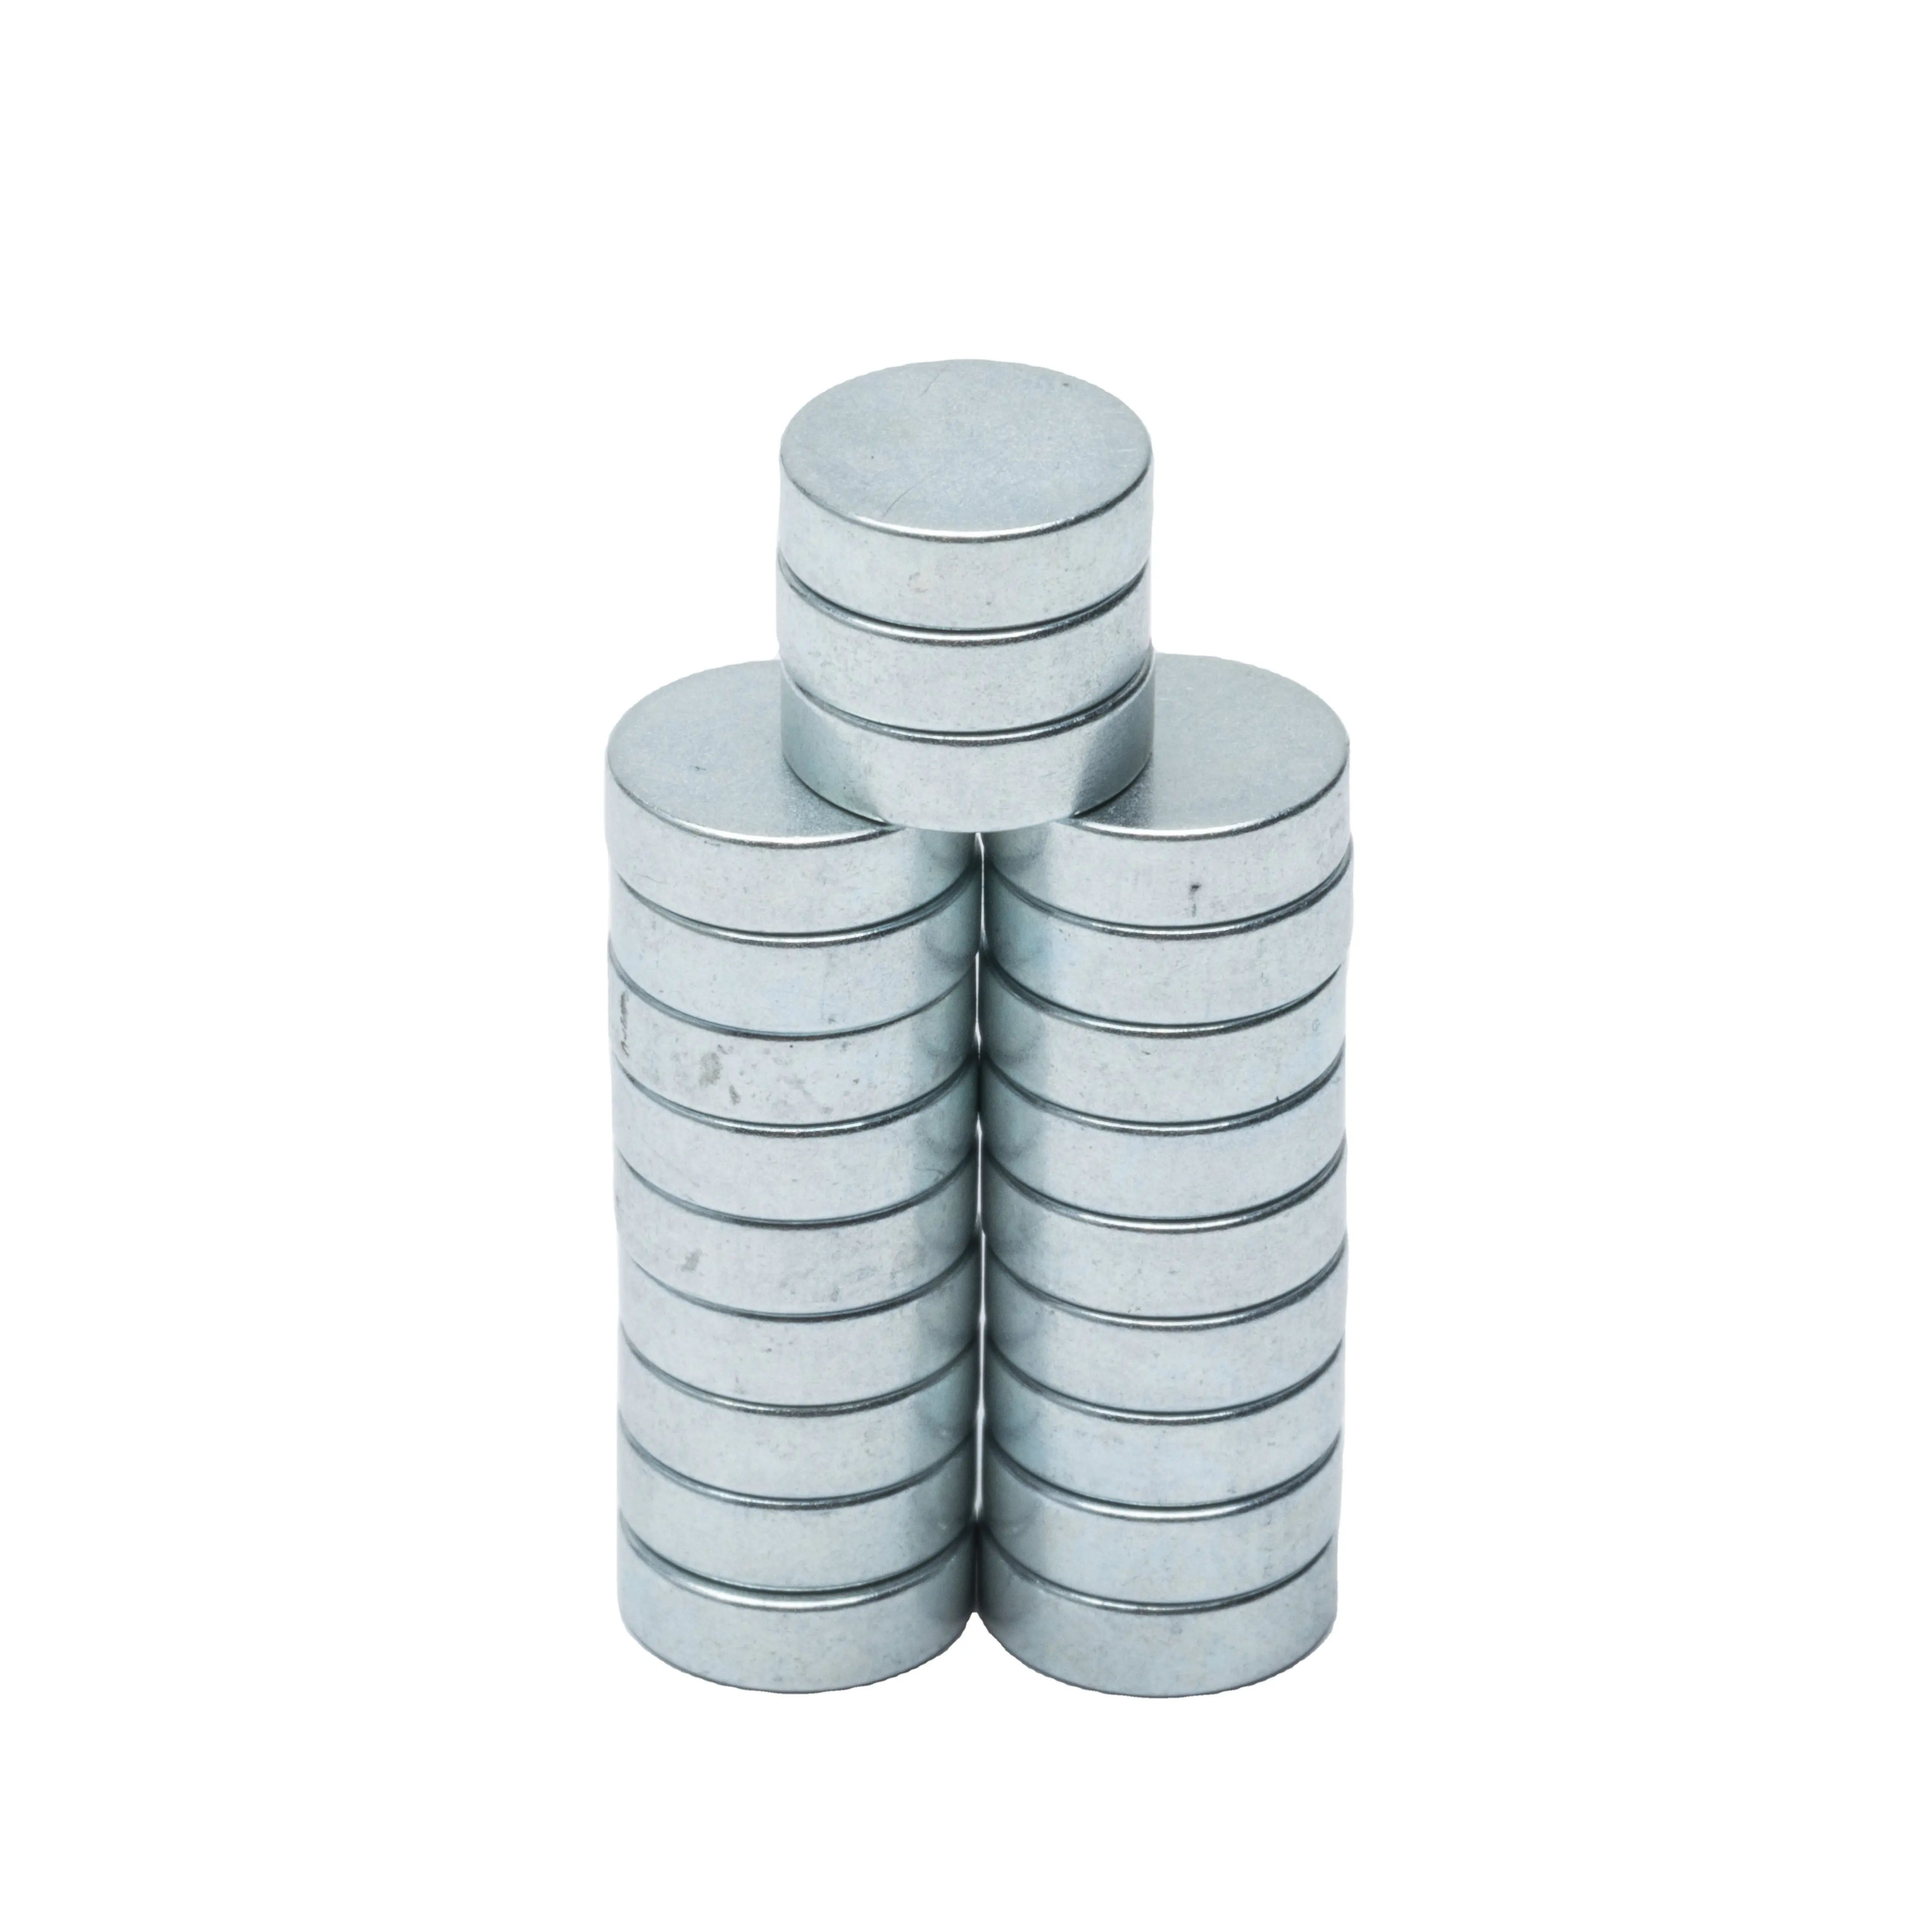 Permanent Magnet Factory NdFeB Magnetic Material Custom Dimension 8*3 10*2 15*2 Neodymium Strong Disc Magnet For Packing